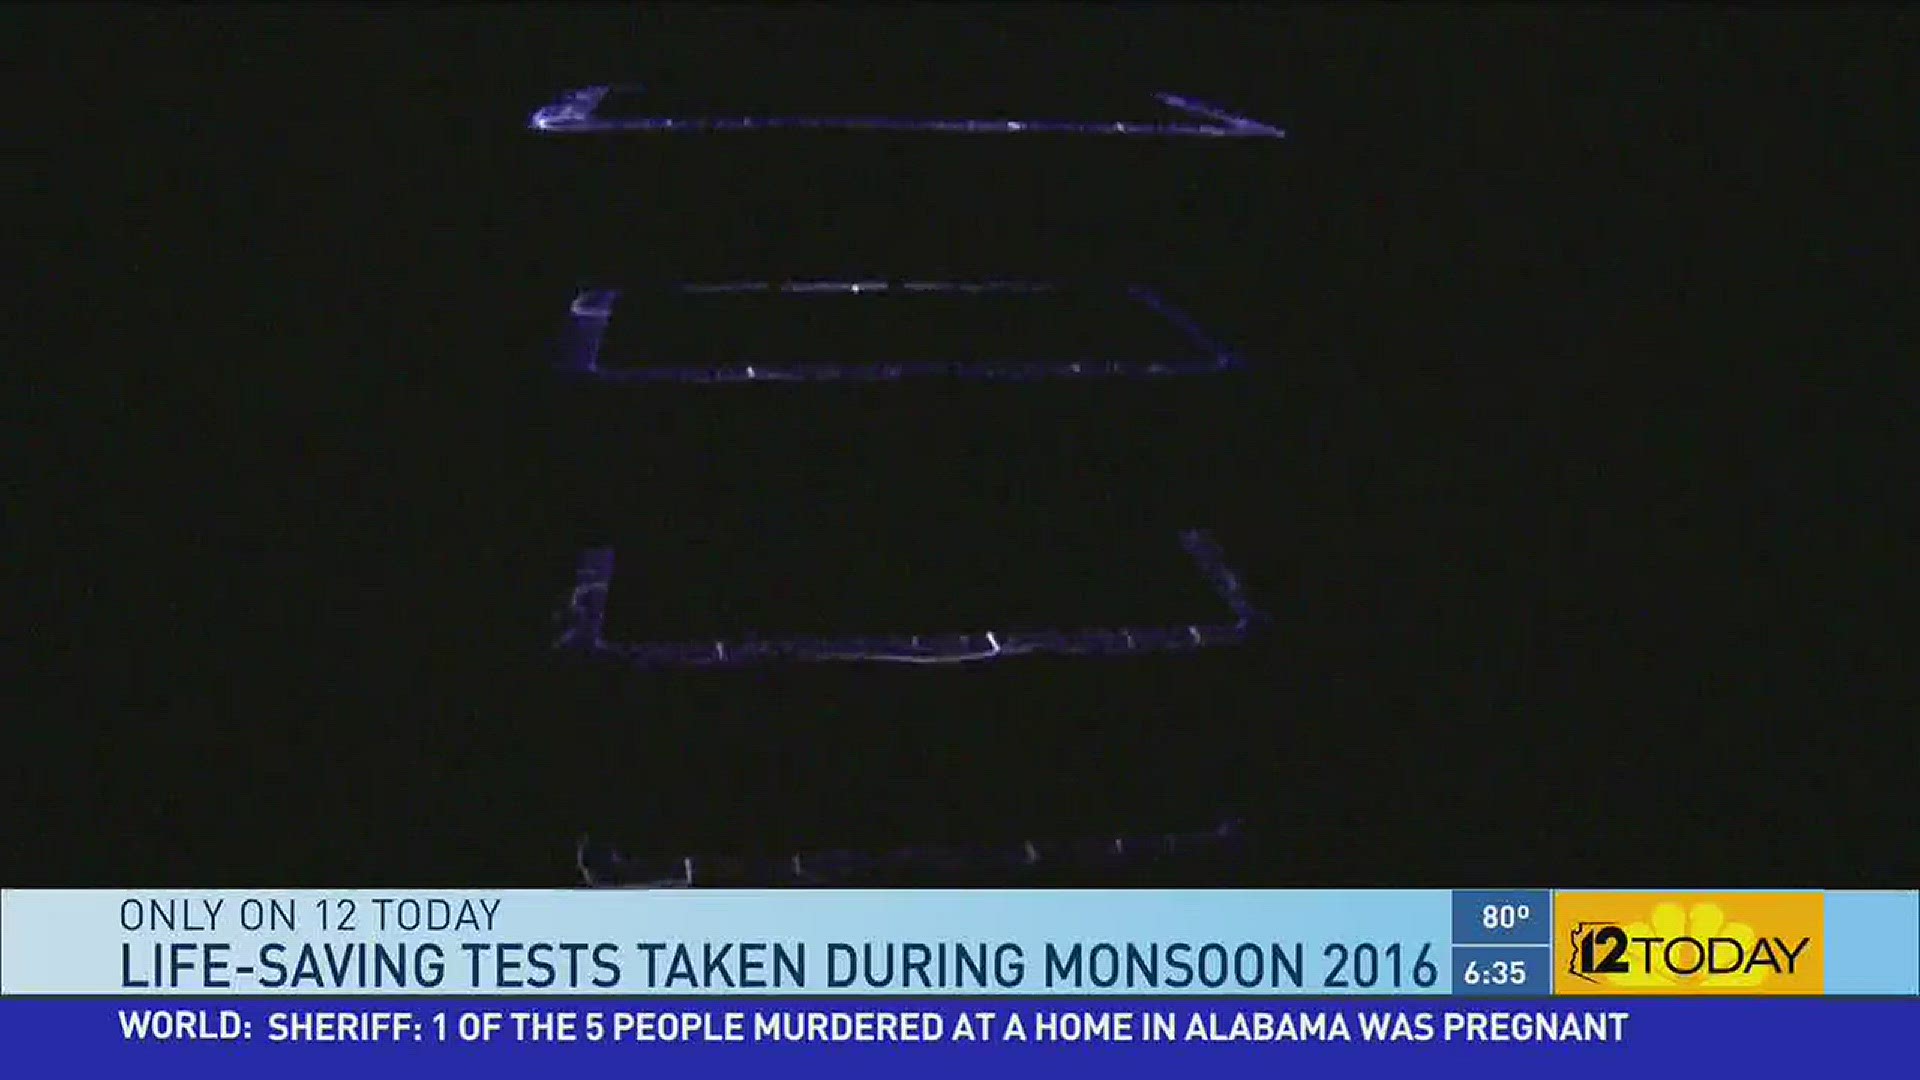 What do Monsoon storms and the SRP safety test lab have in common?